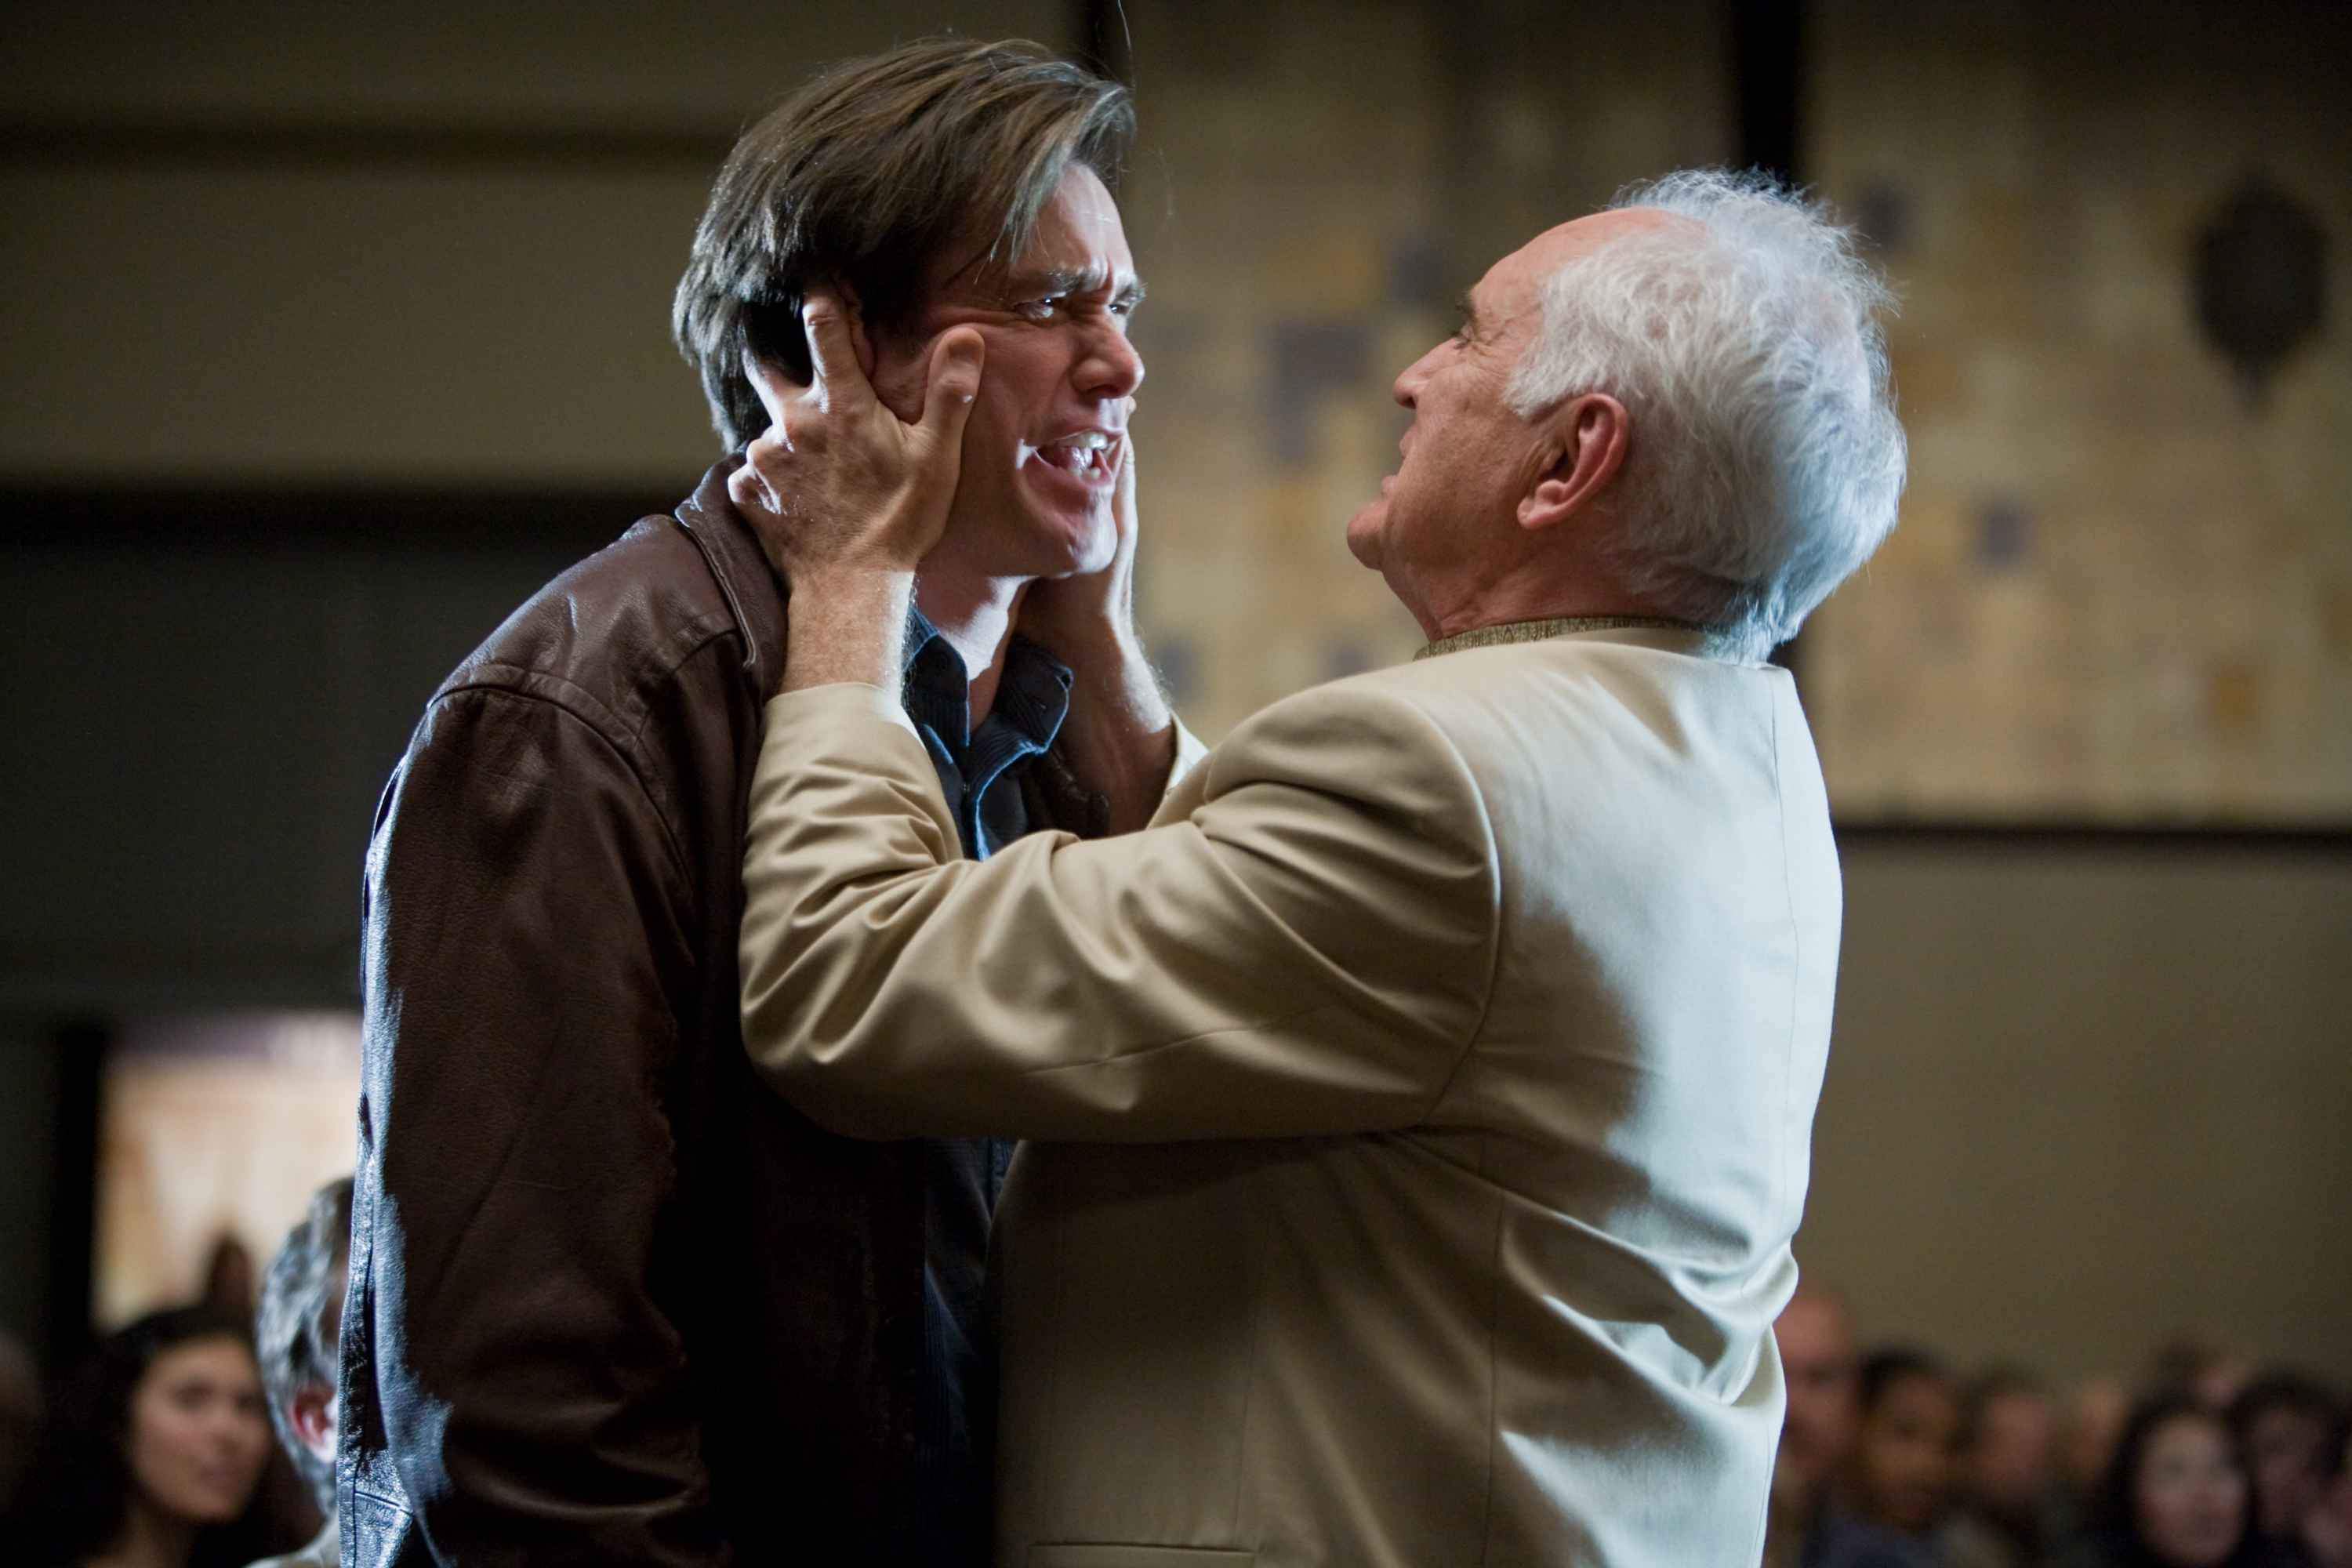 Jim Carrey stars as Carl Allen and Terence Stamp stars as Terrence Bundley in Warner Bros. Pictures' Yes Man (2008). Photo by Melissa Moseley.